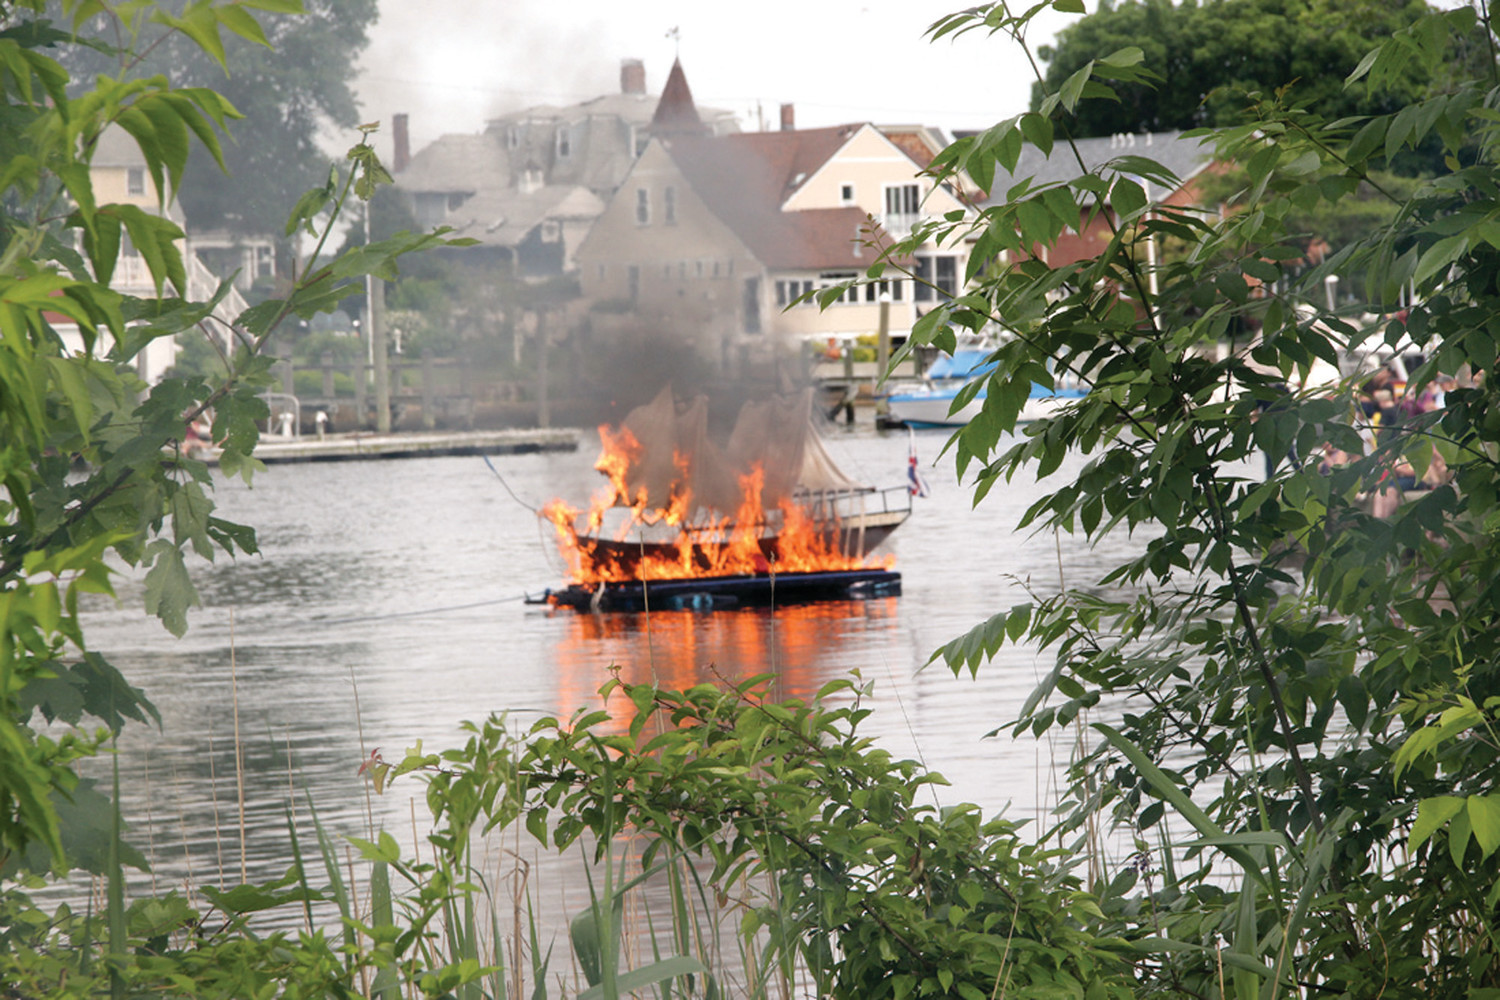 ABLAZE: To the delight of spectators, the Gaspee burns in Pawtuxet Cove.